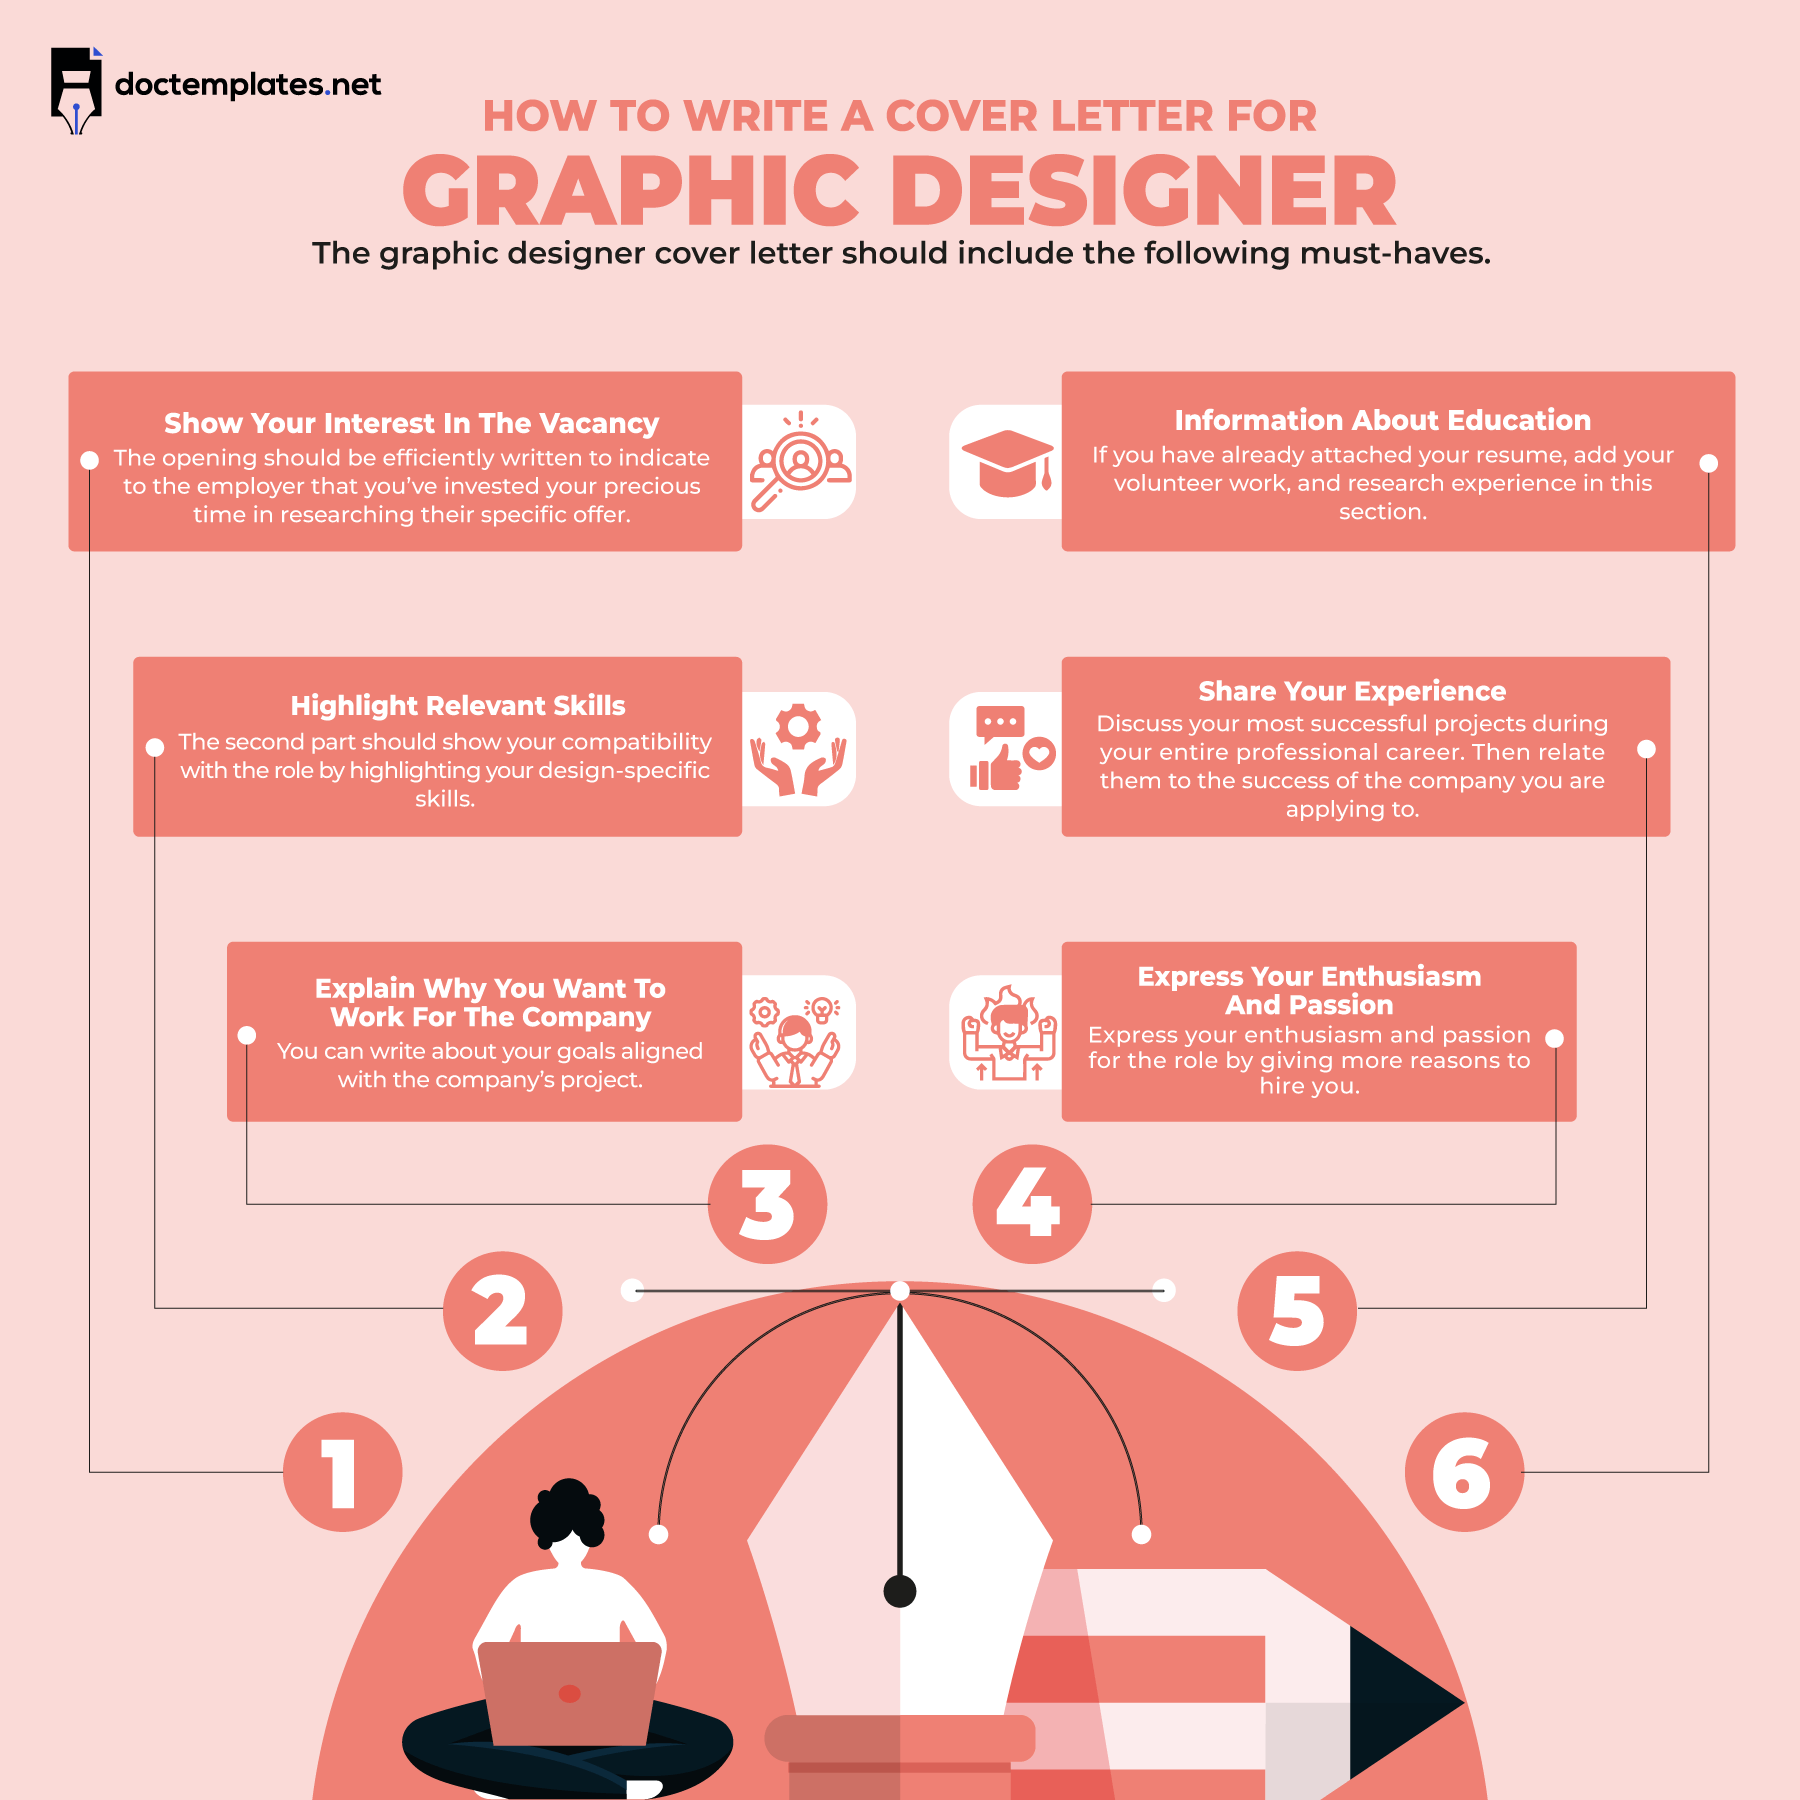 This infographic is about writing a graphic designer cover letter.